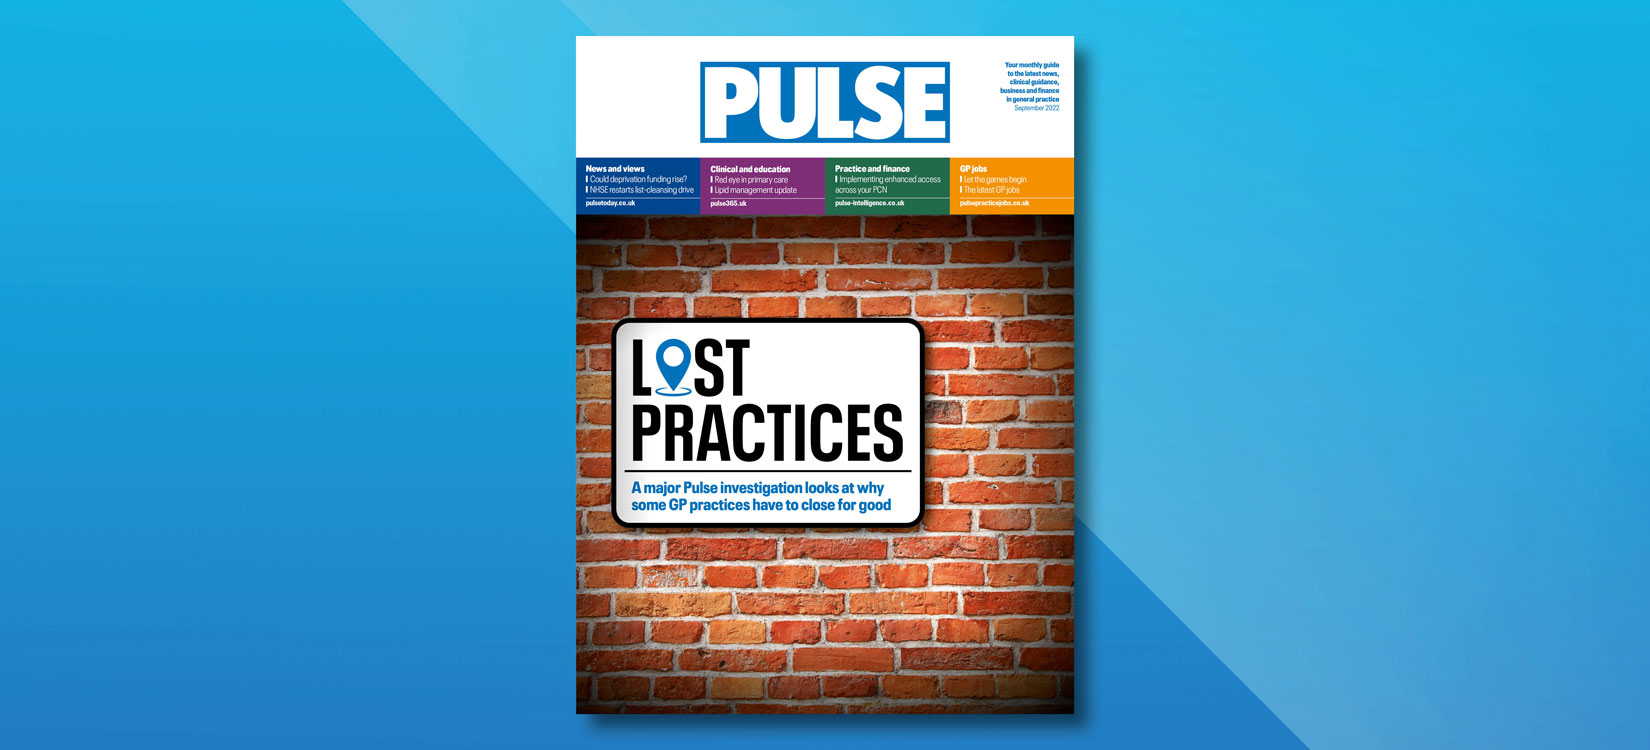 Pulse: Lost Practices